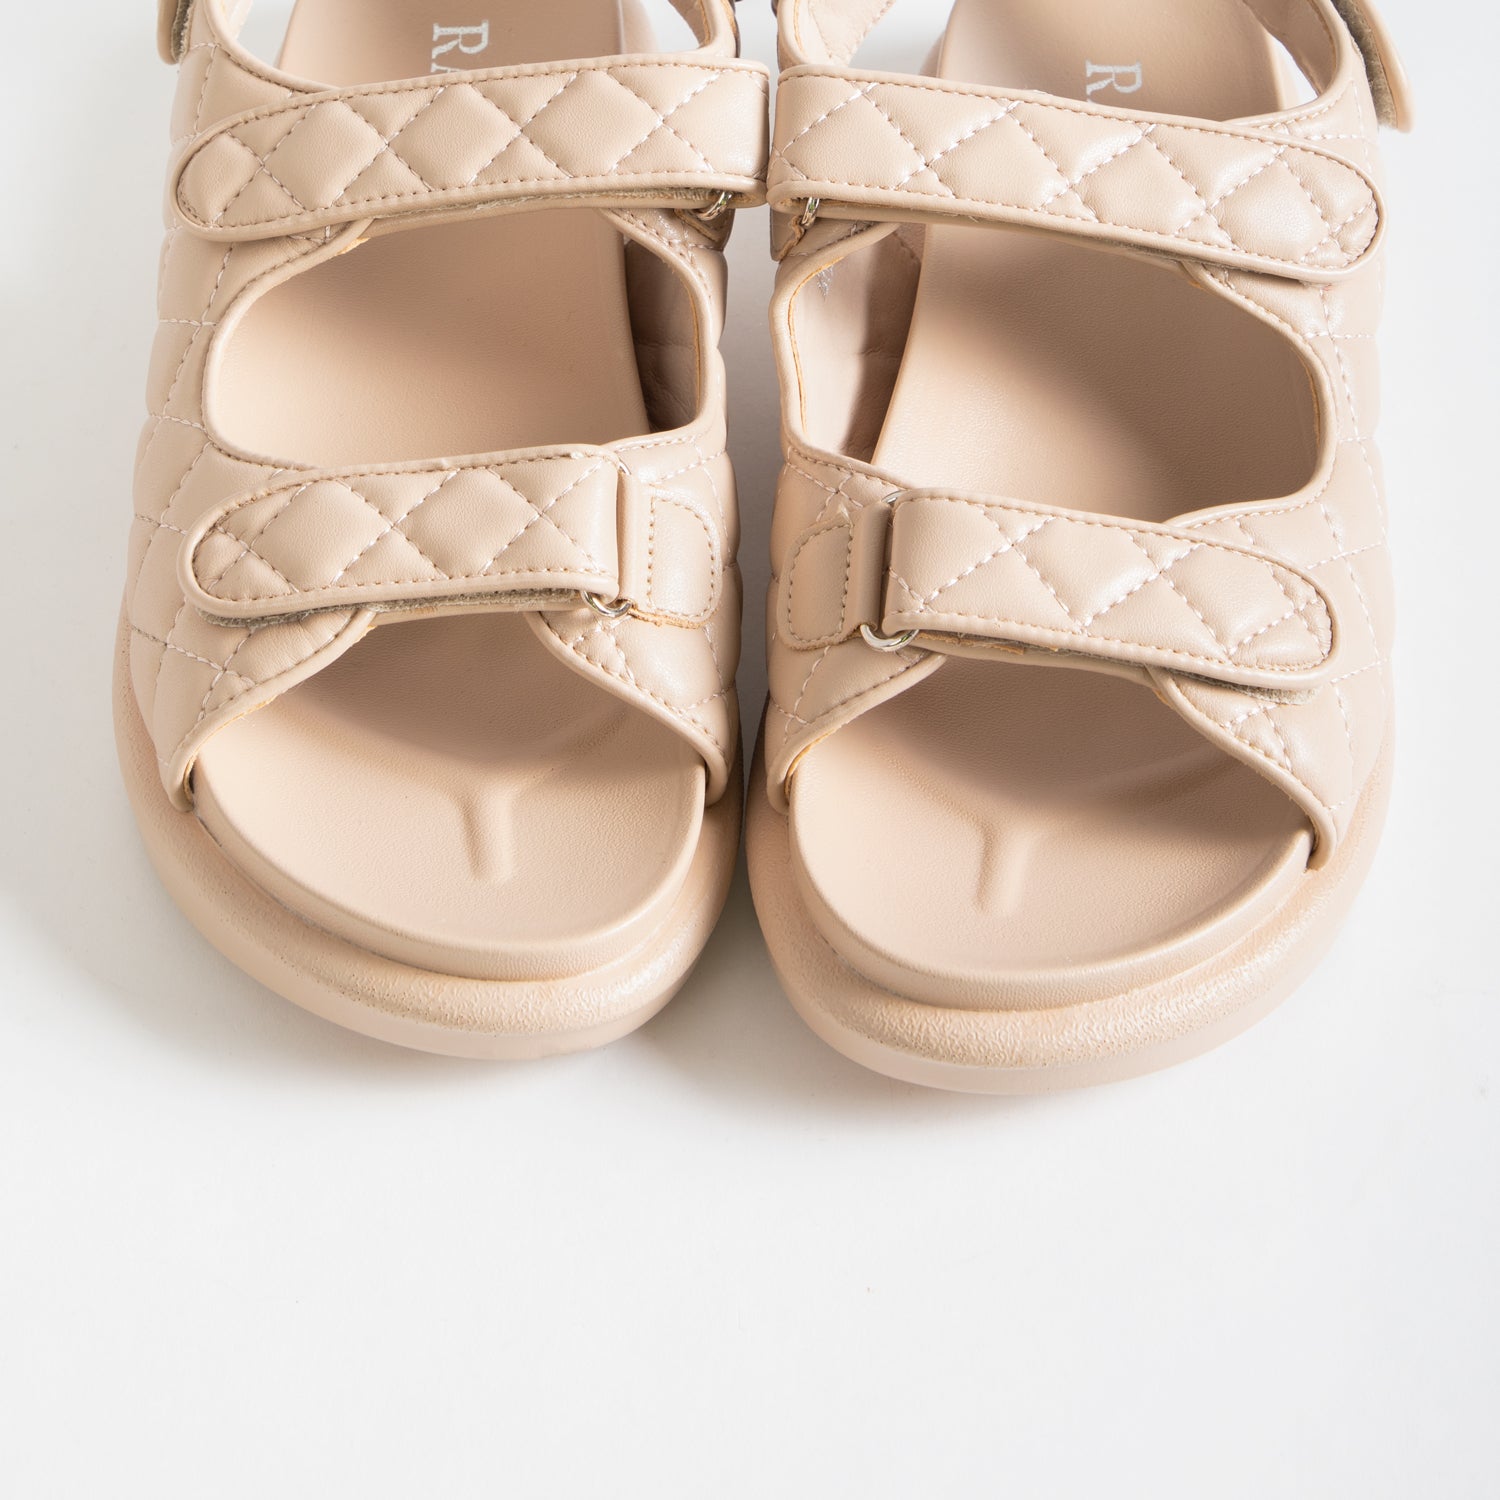 RAID Amylia Quilted Sandal in Beige